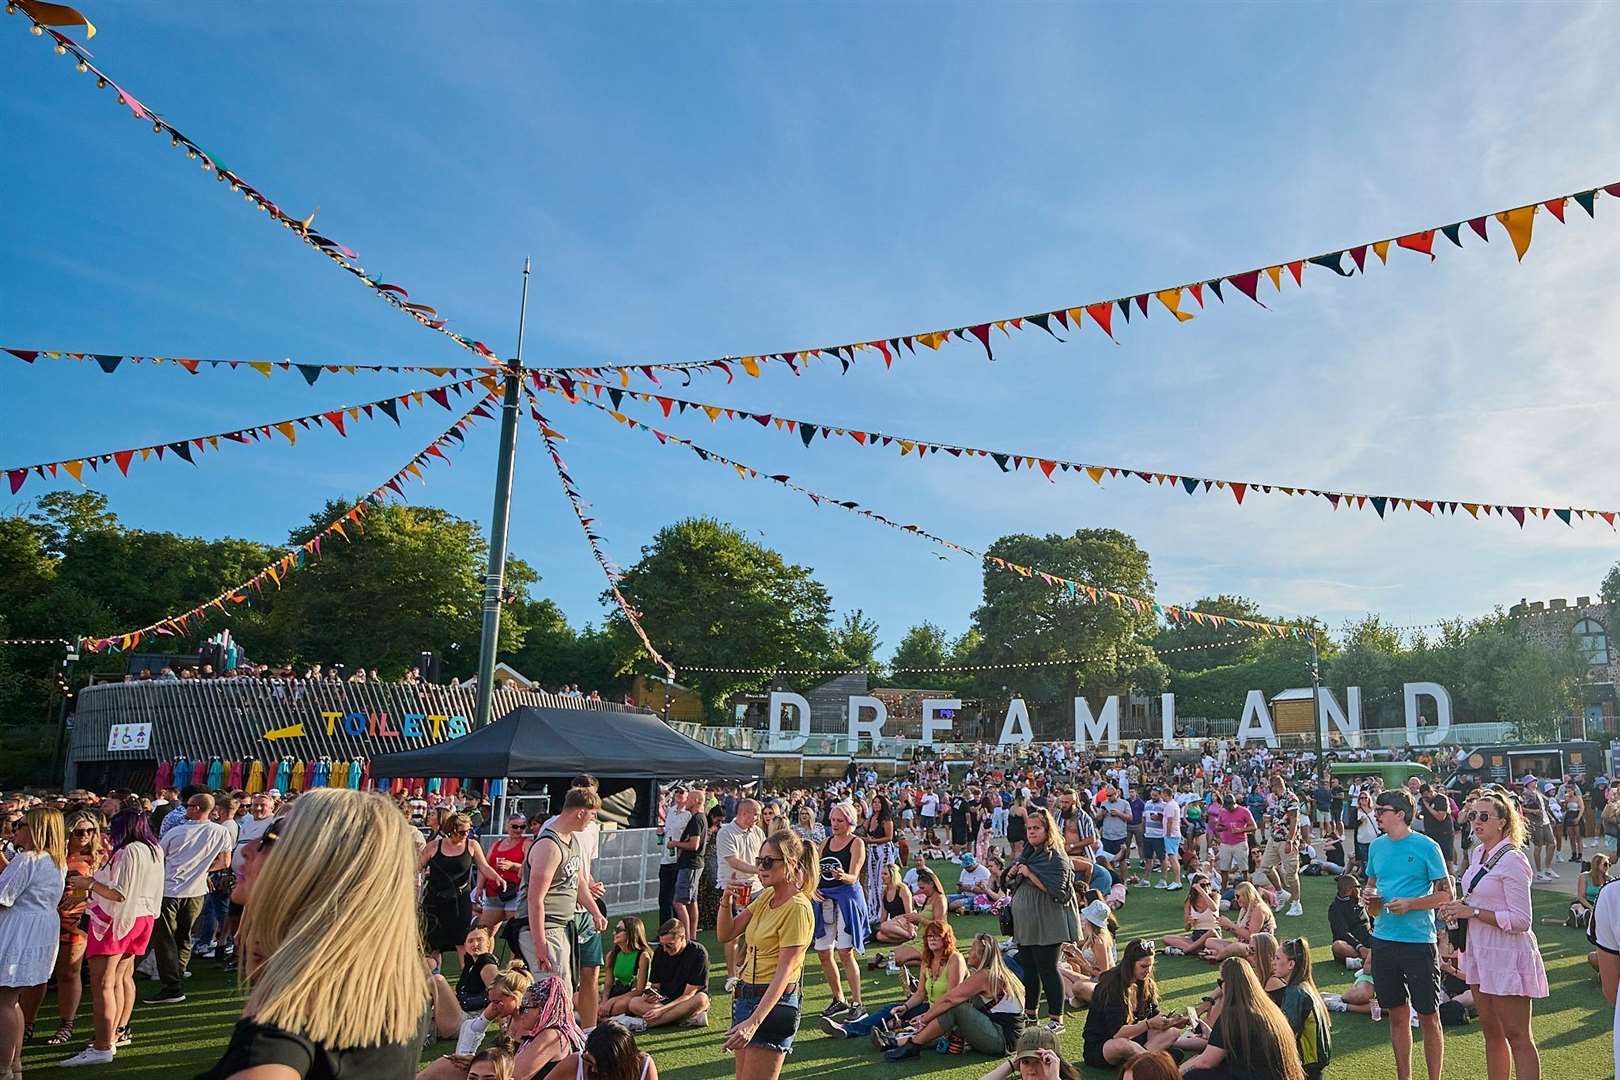 Primal Scream and Happy Mondays will perform at Dreamland as part of the Margate Summer Series. Picture: Dreamland